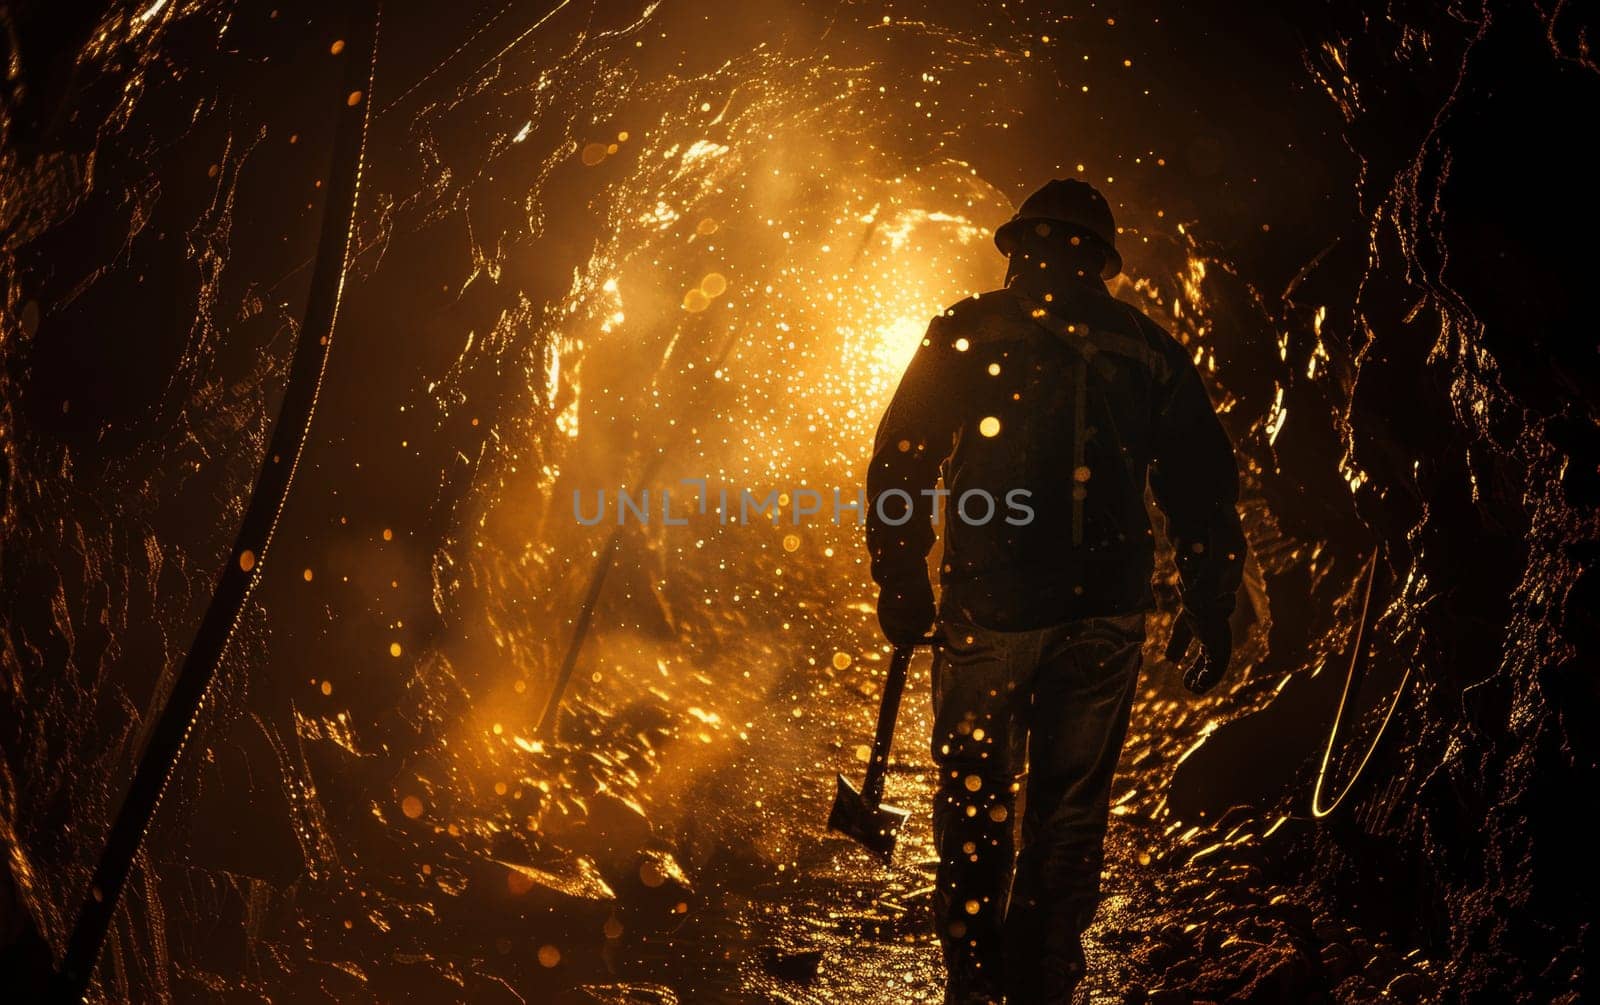 Miner walking in a tunnel, illuminated by a warm golden light, carrying a pickaxe